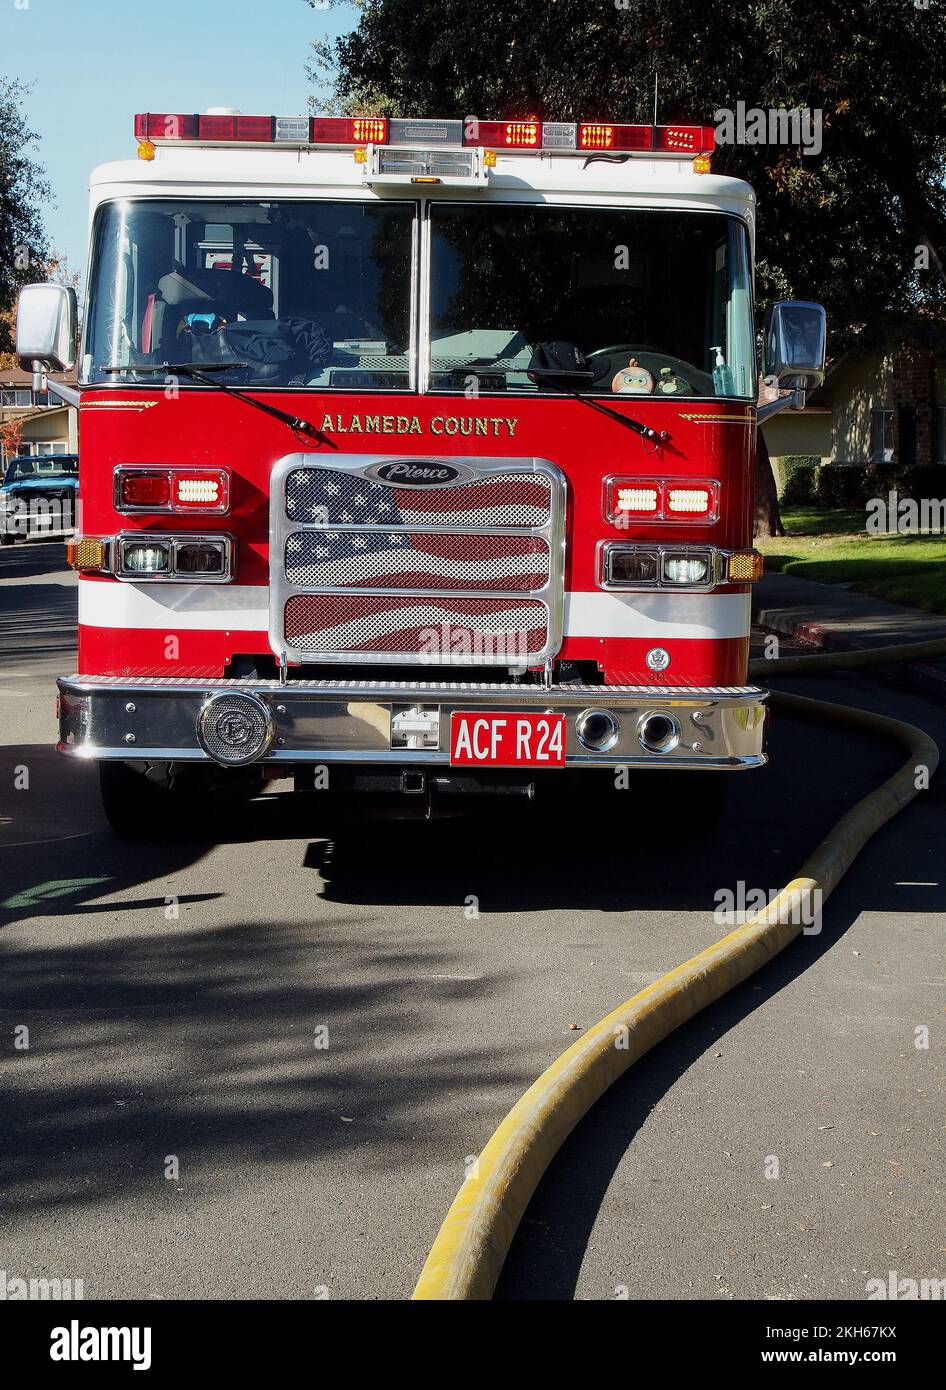 Alameda County Fire department truck at a fire in Union City, California Stock Photo